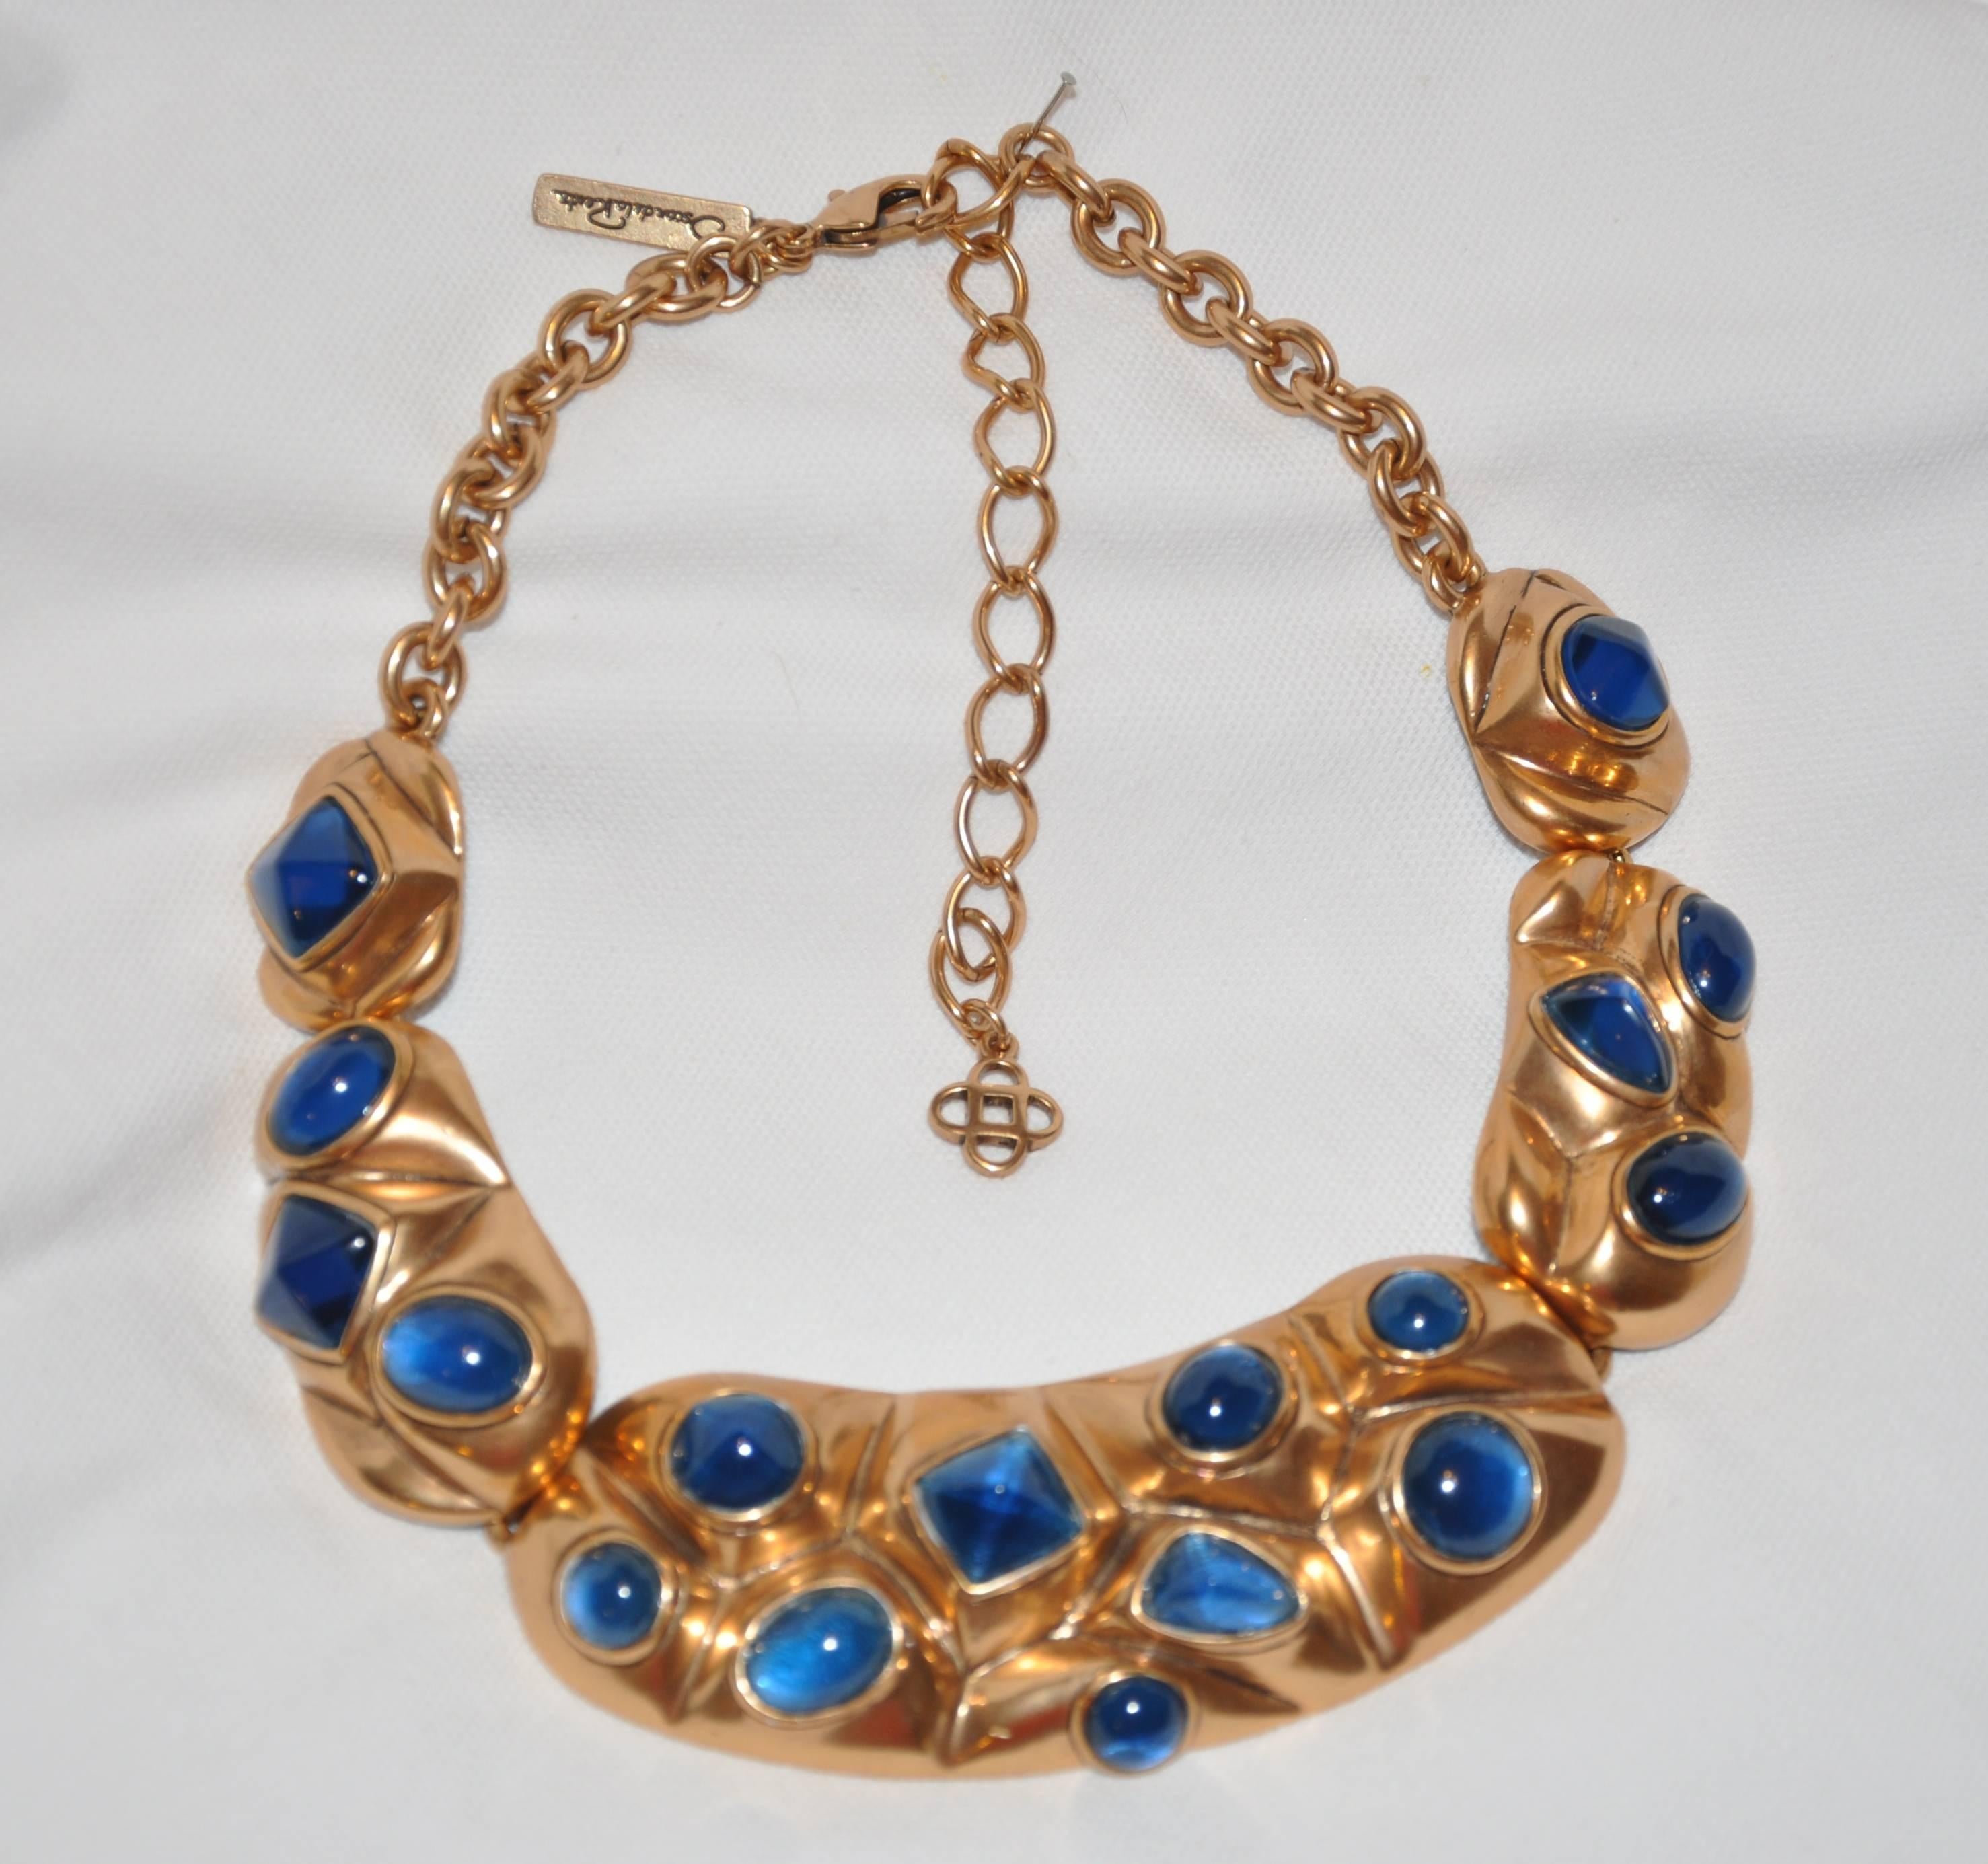        Oscar de la Renta magnificent adjustable necklace with matching cuff bracelet is wonderfully detailed with polished gilded gold vermeil hardware set with multi-size pour glass. The adjustable necklace measures from 17 1/2 inches  to 21